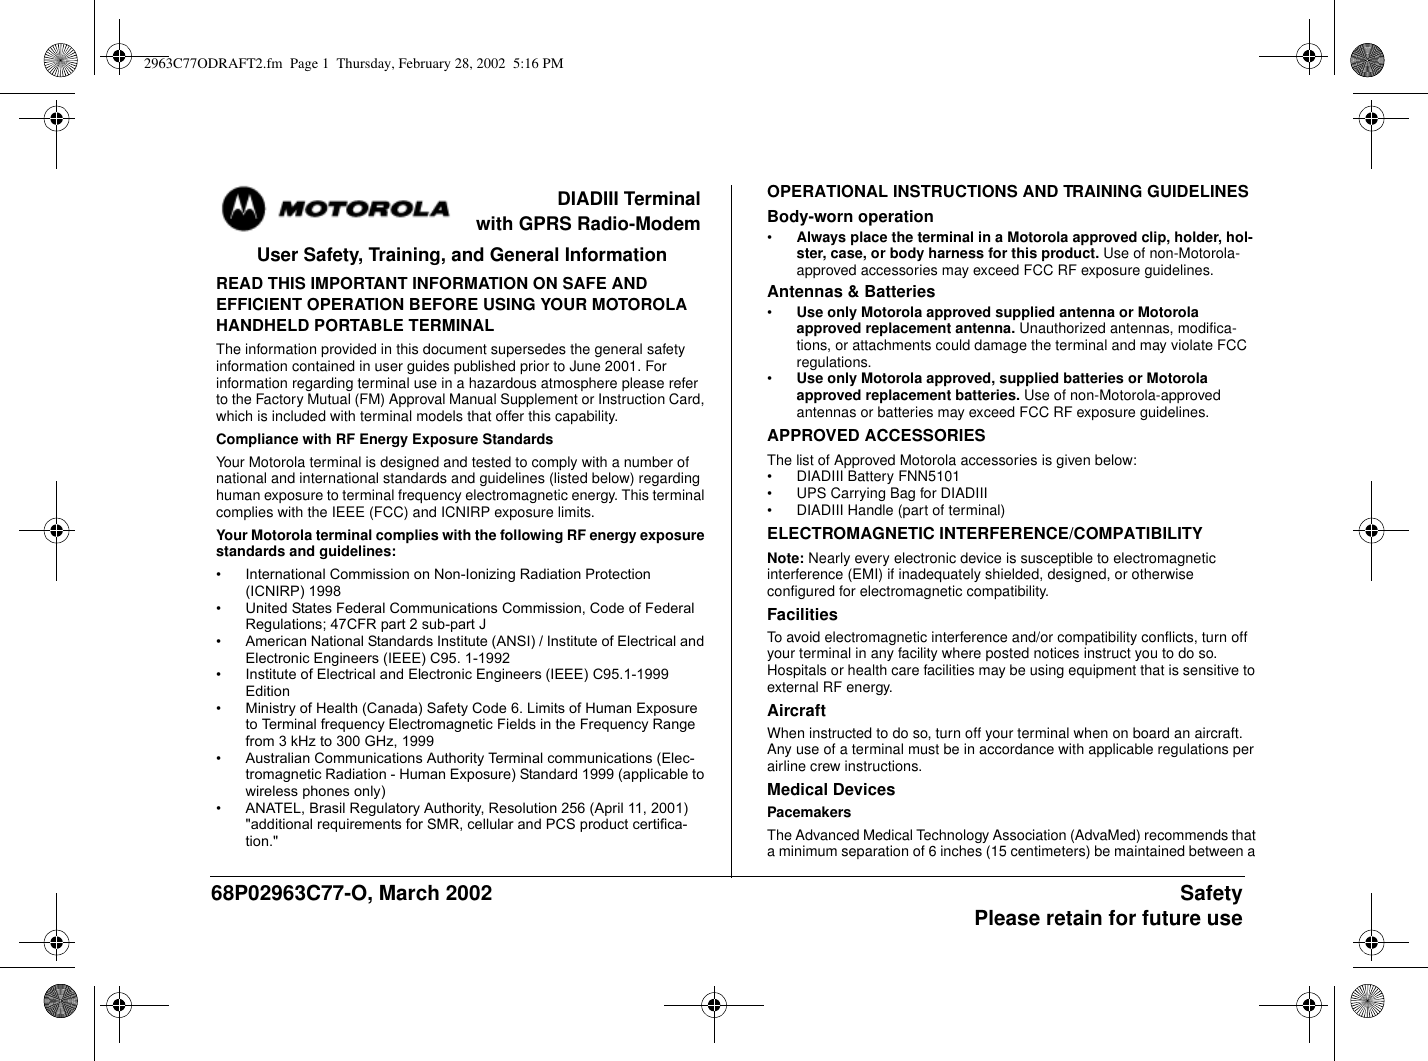 68P02963C77-O, March 2002 SafetyPlease retain for future useDIADIII Terminalwith GPRS Radio-ModemUser Safety, Training, and General InformationREAD THIS IMPORTANT INFORMATION ON SAFE ANDEFFICIENT OPERATION BEFORE USING YOUR MOTOROLAHANDHELD PORTABLE TERMINALThe information provided in this document supersedes the general safetyinformation contained in user guides published prior to June 2001. Forinformation regarding terminal use in a hazardous atmosphere please referto the Factory Mutual (FM) Approval Manual Supplement or Instruction Card,which is included with terminal models that offer this capability.Compliance with RF Energy Exposure StandardsYour Motorola terminal is designed and tested to comply with a number ofnational and international standards and guidelines (listed below) regardinghuman exposure to terminal frequency electromagnetic energy. This terminalcomplies with the IEEE (FCC) and ICNIRP exposure limits.Your Motorola terminal complies with the following RF energy exposurestandards and guidelines:•International Commission on Non-Ionizing Radiation Protection (ICNIRP) 1998•United States Federal Communications Commission, Code of Federal Regulations; 47CFR part 2 sub-part J•American National Standards Institute (ANSI) / Institute of Electrical and Electronic Engineers (IEEE) C95. 1-1992•Institute of Electrical and Electronic Engineers (IEEE) C95.1-1999Edition•Ministry of Health (Canada) Safety Code 6. Limits of Human Exposure to Terminal frequency Electromagnetic Fields in the Frequency Range from 3 kHz to 300 GHz, 1999•Australian Communications Authority Terminal communications (Elec-tromagnetic Radiation - Human Exposure) Standard 1999 (applicable to wireless phones only)• ANATEL, Brasil Regulatory Authority, Resolution 256 (April 11, 2001) &quot;additional requirements for SMR, cellular and PCS product certifica-tion.&quot;OPERATIONAL INSTRUCTIONS AND TRAINING GUIDELINESBody-worn operation•Always place the terminal in a Motorola approved clip, holder, hol-ster, case, or body harness for this product. Use of non-Motorola-approved accessories may exceed FCC RF exposure guidelines.Antennas &amp; Batteries•Use only Motorola approved supplied antenna or Motorolaapproved replacement antenna. Unauthorized antennas, modifica-tions, or attachments could damage the terminal and may violate FCCregulations.•Use only Motorola approved, supplied batteries or Motorolaapproved replacement batteries. Use of non-Motorola-approvedantennas or batteries may exceed FCC RF exposure guidelines.APPROVED ACCESSORIESThe list of Approved Motorola accessories is given below:• DIADIII Battery FNN5101• UPS Carrying Bag for DIADIII• DIADIII Handle (part of terminal)ELECTROMAGNETIC INTERFERENCE/COMPATIBILITYNote: Nearly every electronic device is susceptible to electromagneticinterference (EMI) if inadequately shielded, designed, or otherwiseconfigured for electromagnetic compatibility.FacilitiesTo avoid electromagnetic interference and/or compatibility conflicts, turn offyour terminal in any facility where posted notices instruct you to do so.Hospitals or health care facilities may be using equipment that is sensitive toexternal RF energy.AircraftWhen instructed to do so, turn off your terminal when on board an aircraft.Any use of a terminal must be in accordance with applicable regulations perairline crew instructions.Medical DevicesPacemakersThe Advanced Medical Technology Association (AdvaMed) recommends thata minimum separation of 6 inches (15 centimeters) be maintained between a2963C77ODRAFT2.fm Page 1 Thursday, February 28, 2002 5:16 PM